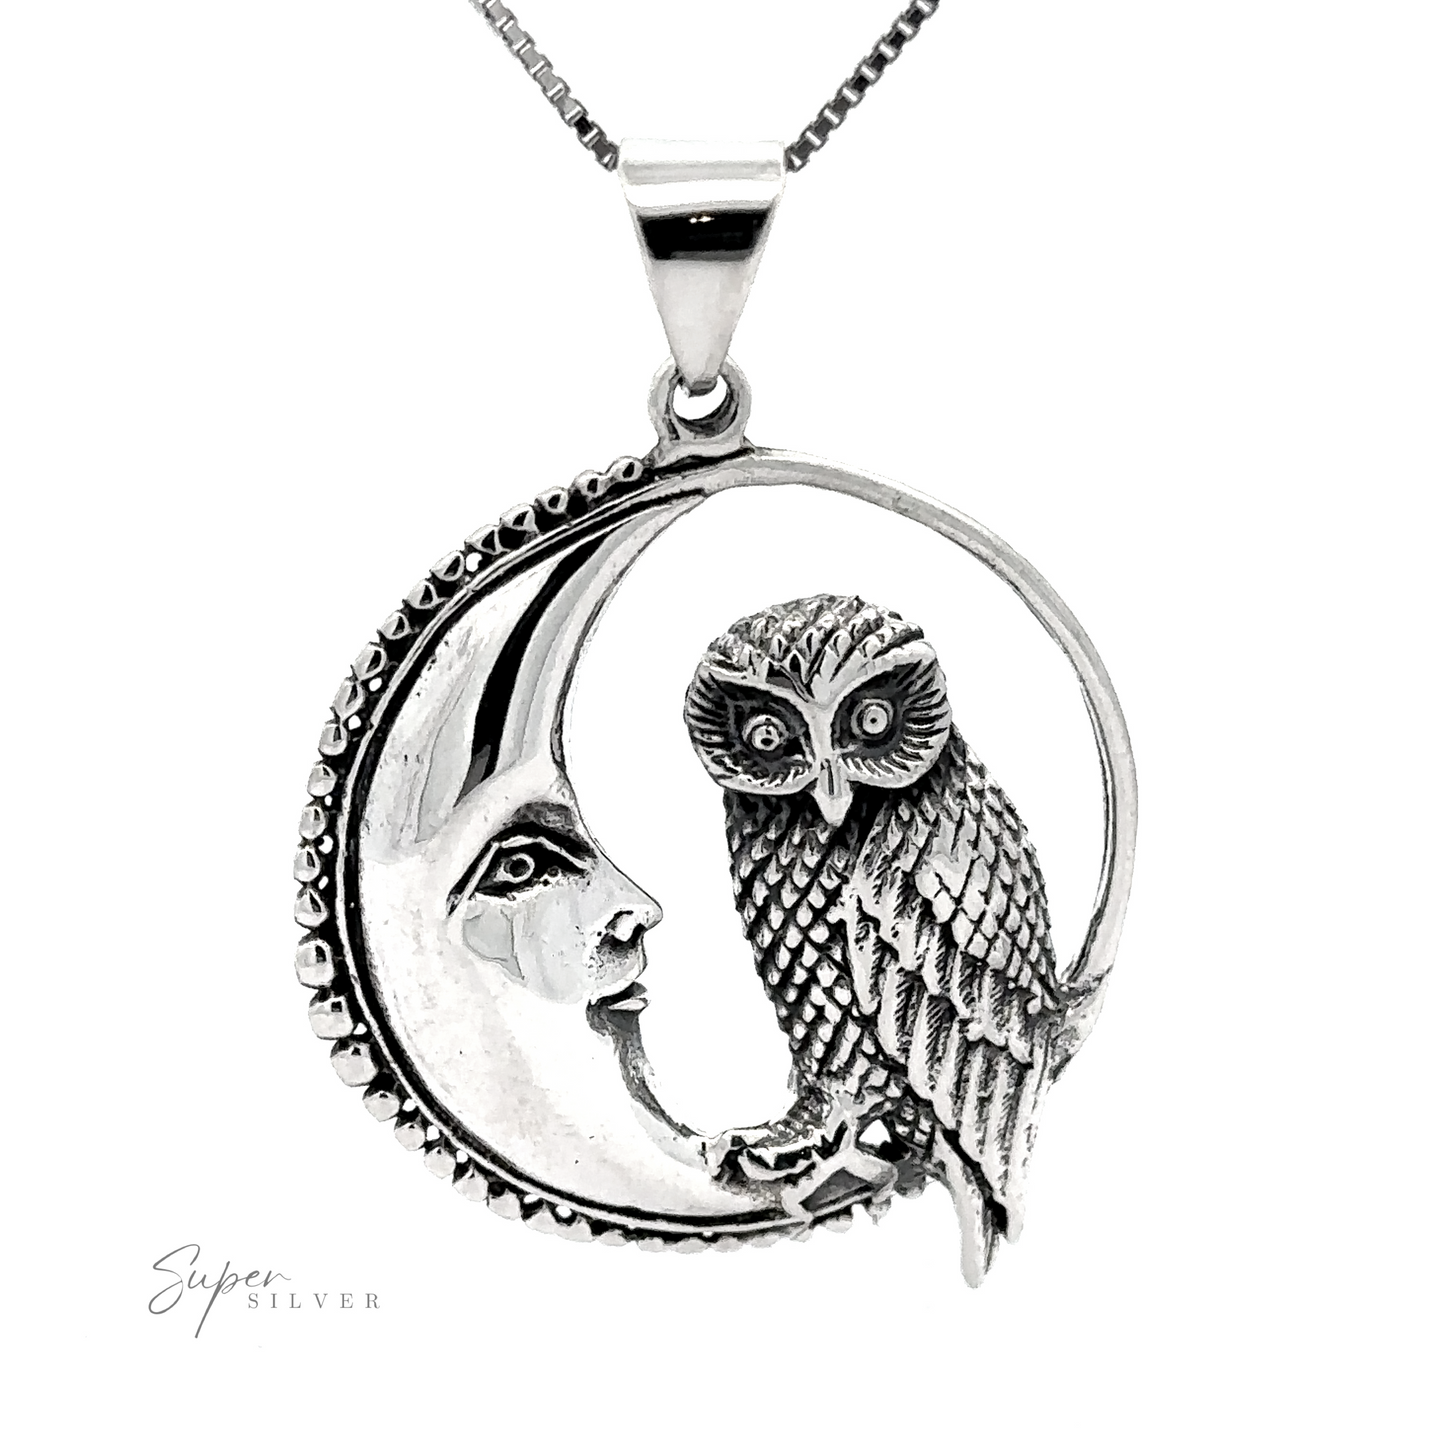 Owl and Moon Pendant featuring a crescent moon with a human face and an owl perched on the edge, suspended from a chain.